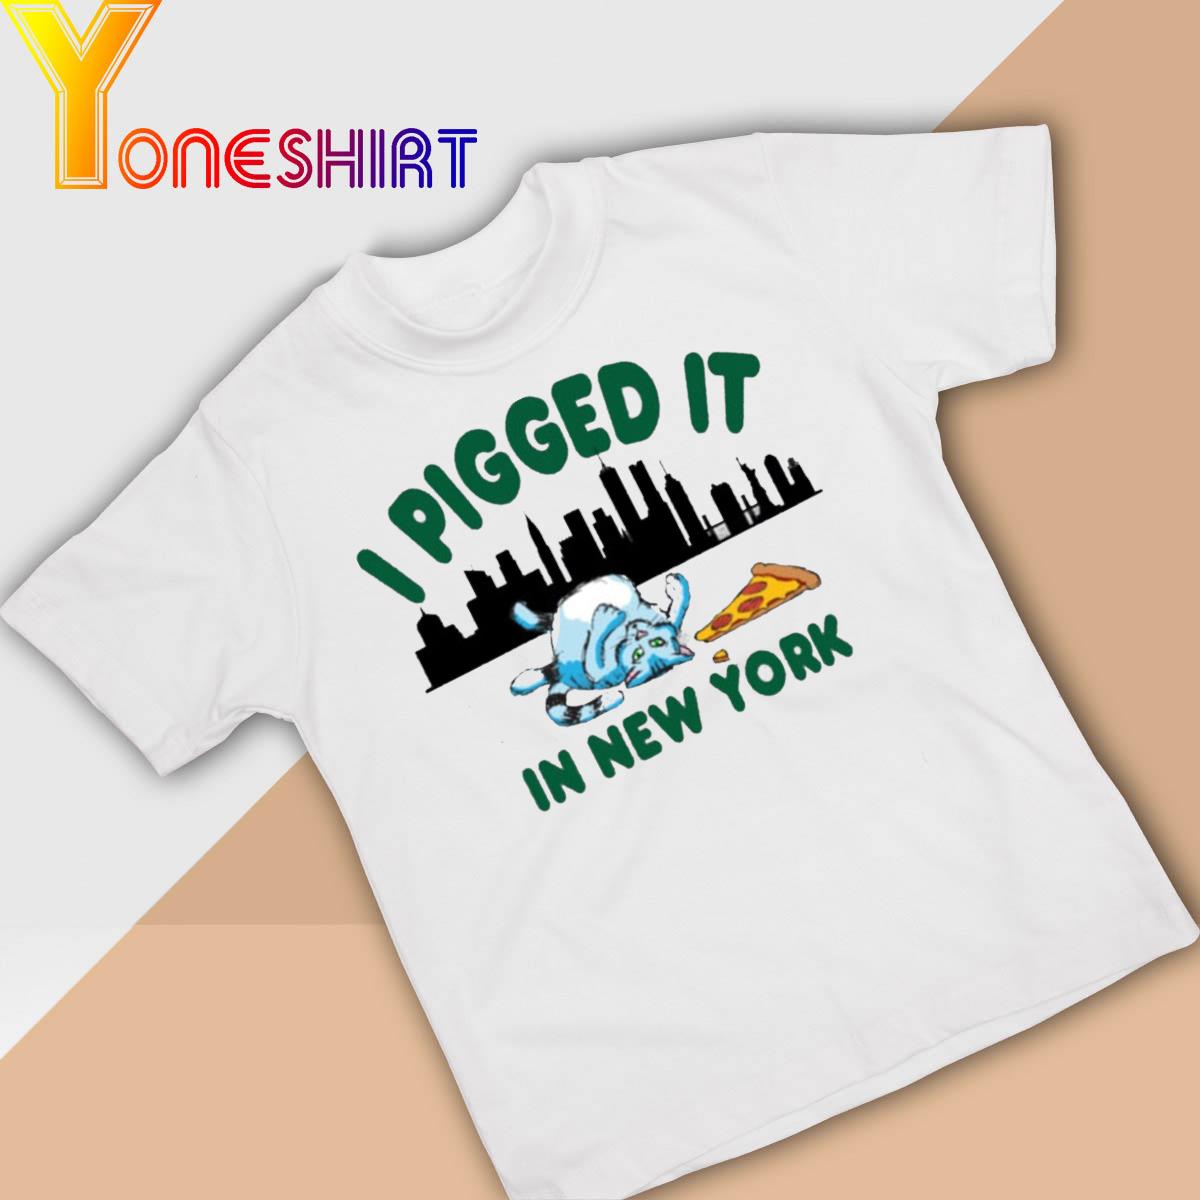 I pigged it in New York shirt